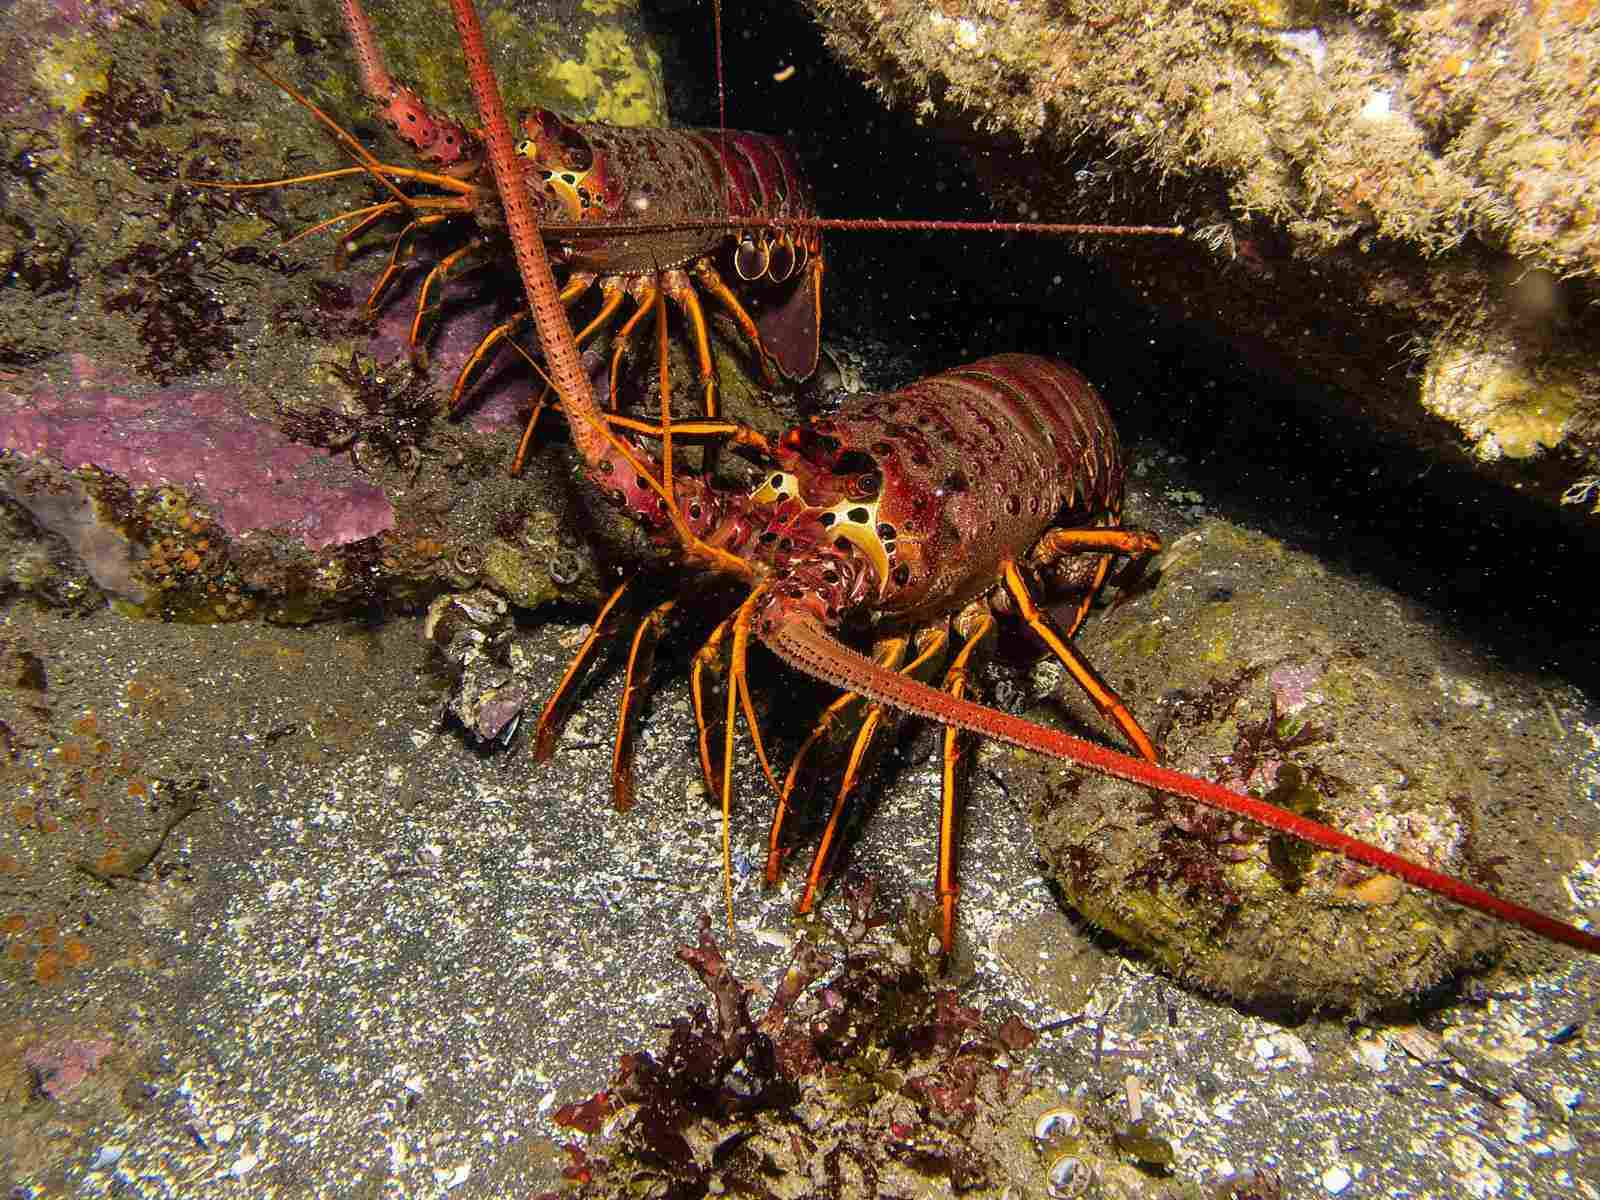 Picture of spiny lobster to illustrate how they use magneto-reception.